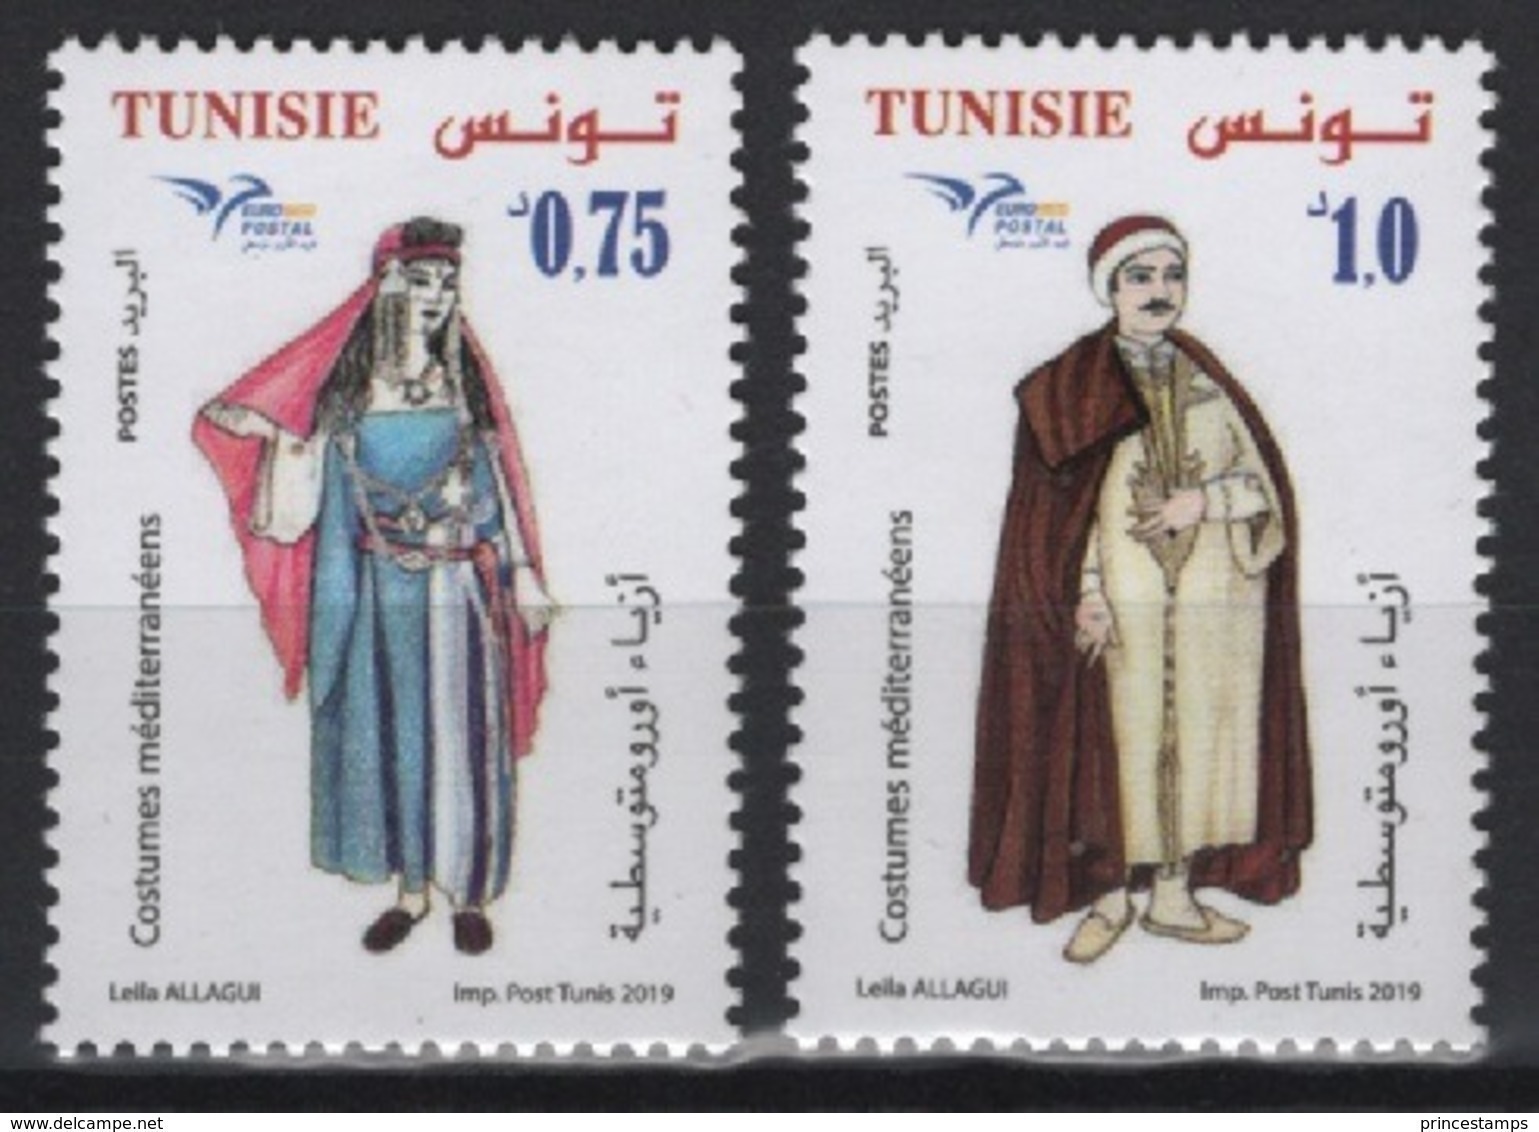 Tunisia (2019)  - Set -  /  Joint With Euromed - Dress - Dances - Culture - Costumes - Joint Issues